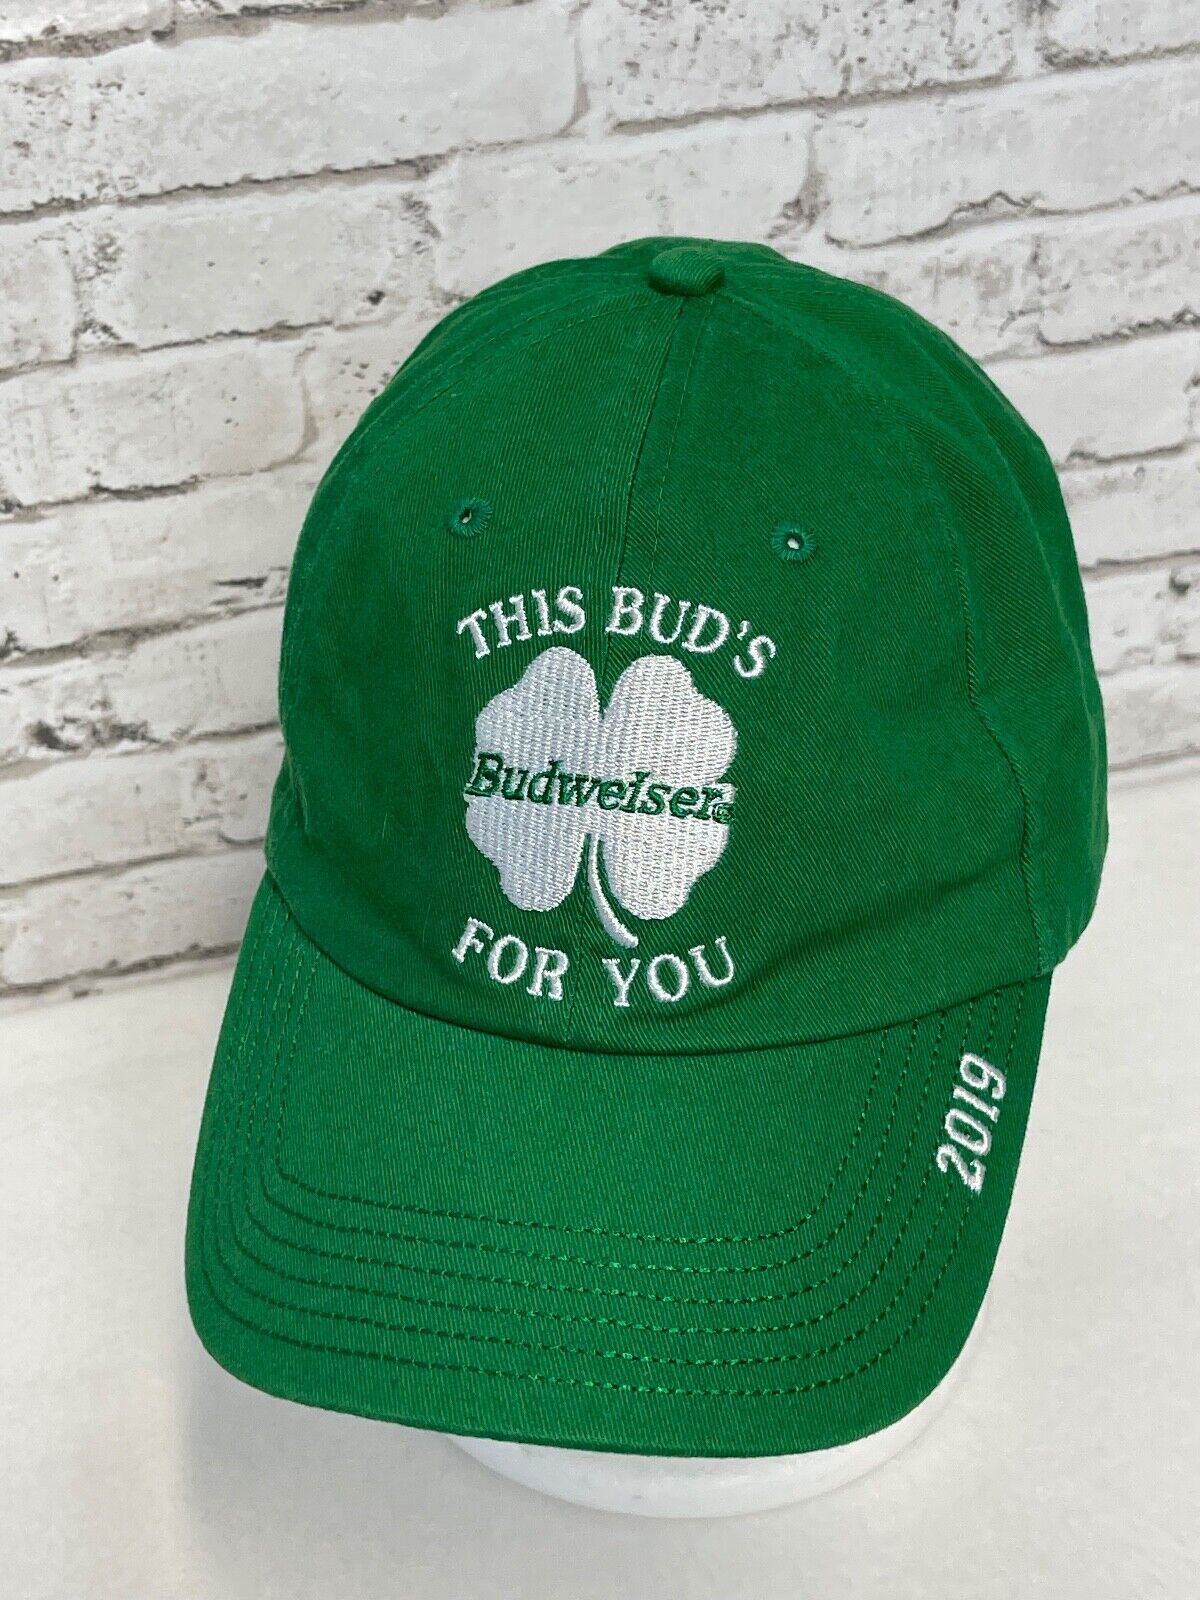 Budweiser St. Patrick's Day Hat Green White Clover This Bud's For You 2019